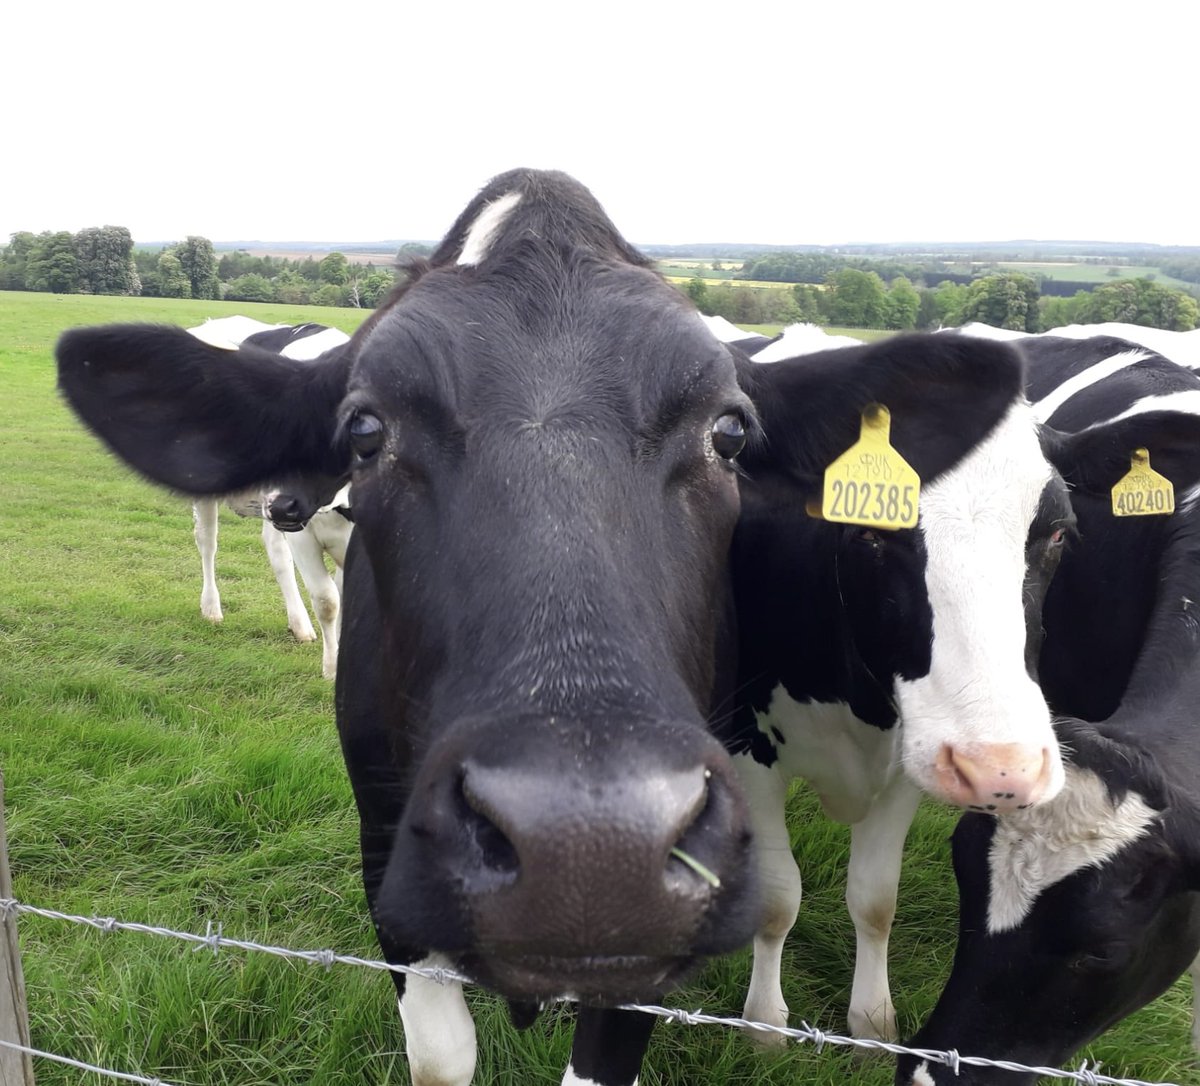 There’s some inquisitive new residents @DuncombePark and we had a chat with them on our morning walk #RuralBusiness #ThankBritishFarmers #LoveWhereYouLive @VisitHelmsley